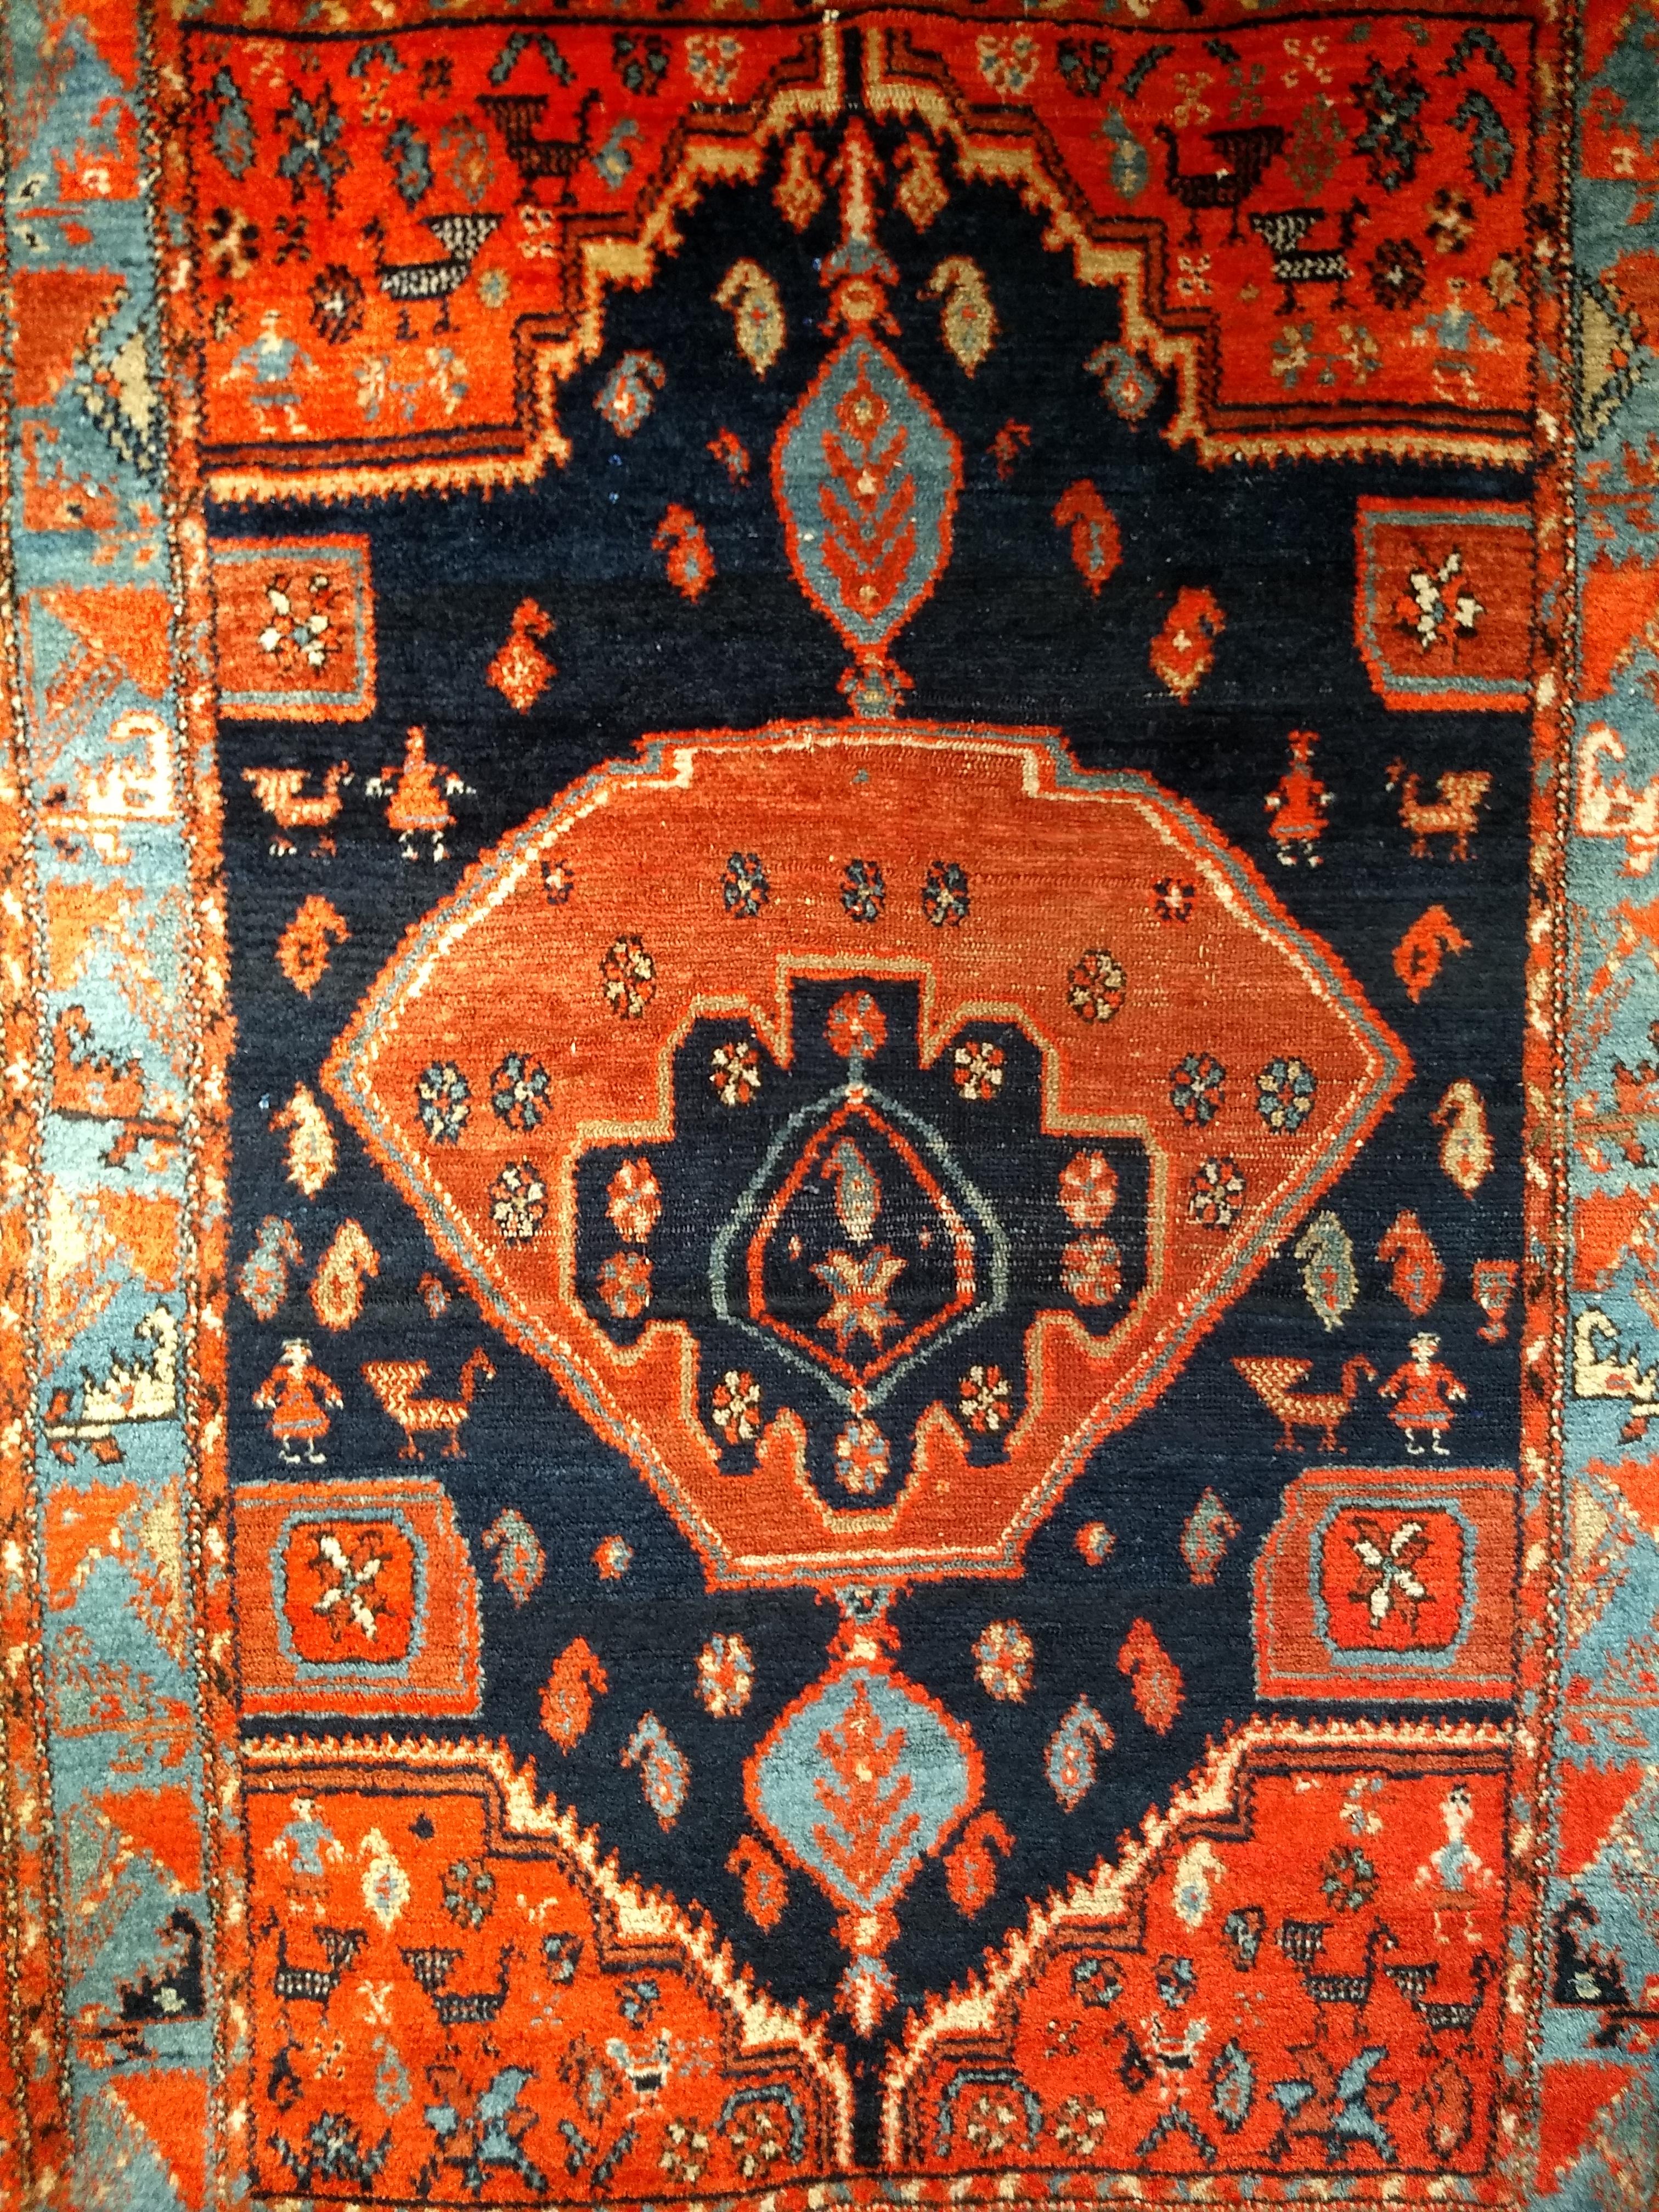 A beautiful Persian Mission Malayer area rug with a truly unique medallion design in navy blue, turquoise, and terracotta colors from the early 1900s.   A great example of village weaving with the design of human and animal forms throughout.  The